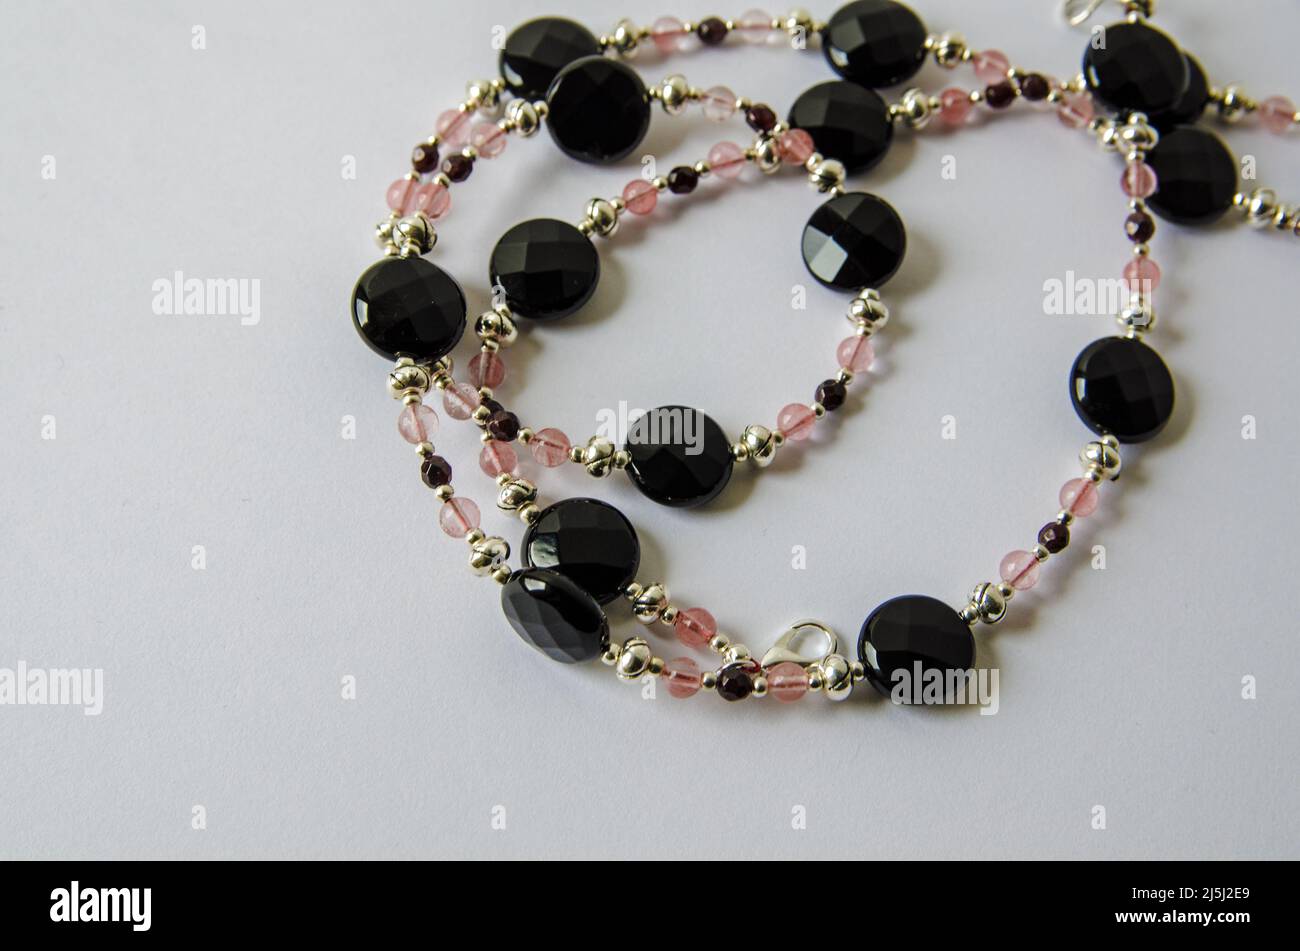 A necklace handmade from beads of obsidian, garnet and strawberry quartz coiled on a white background with drop shadow. Stock Photo